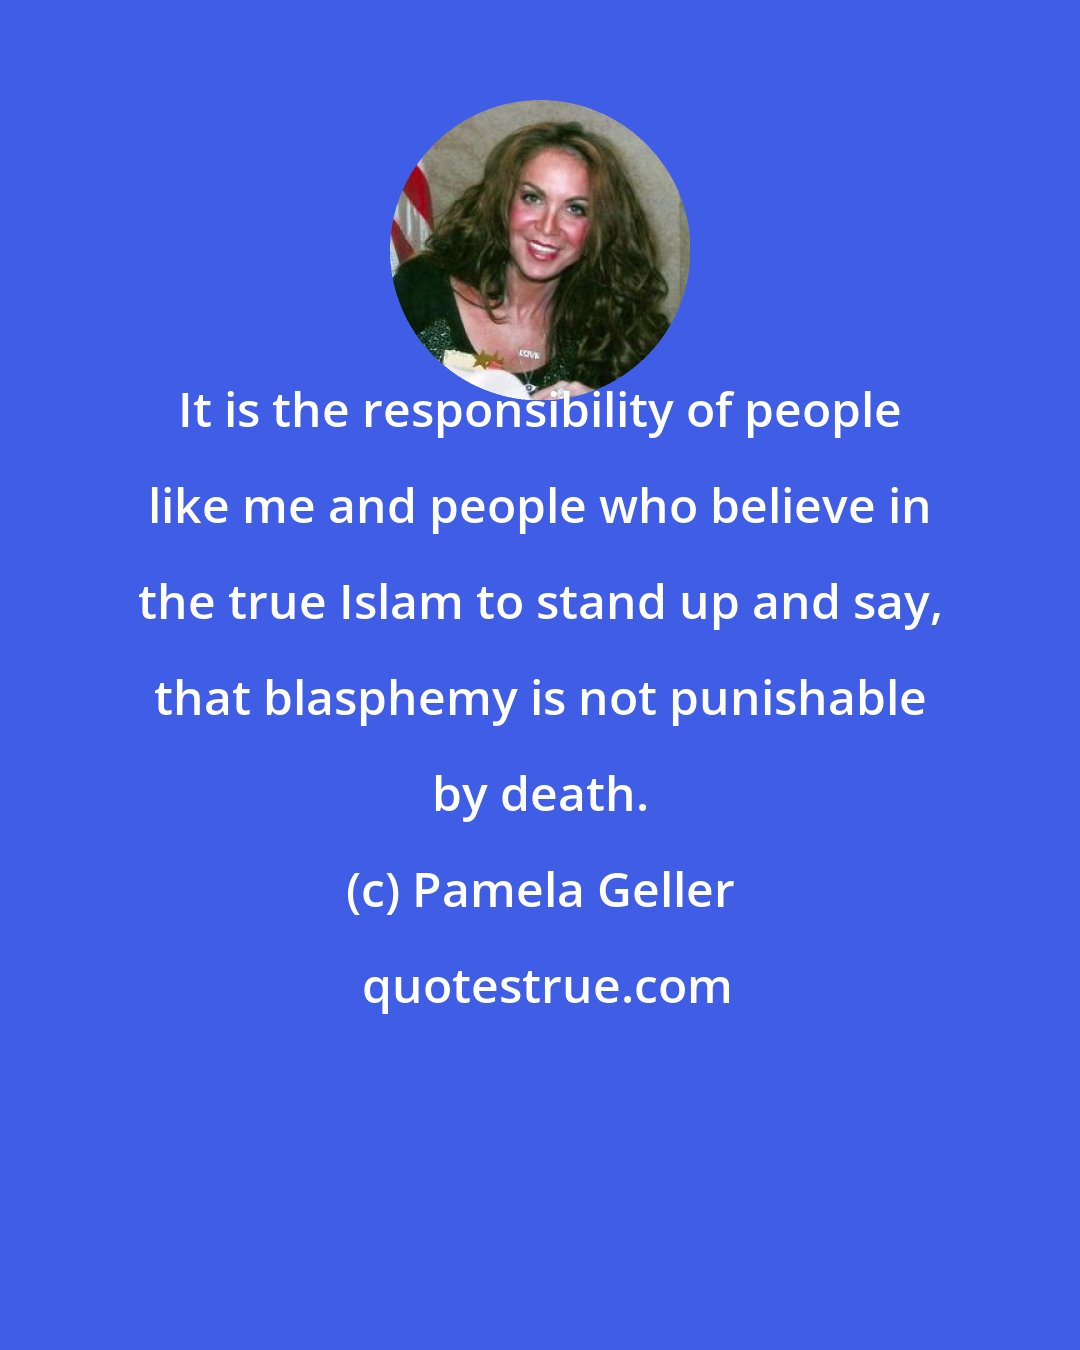 Pamela Geller: It is the responsibility of people like me and people who believe in the true Islam to stand up and say, that blasphemy is not punishable by death.